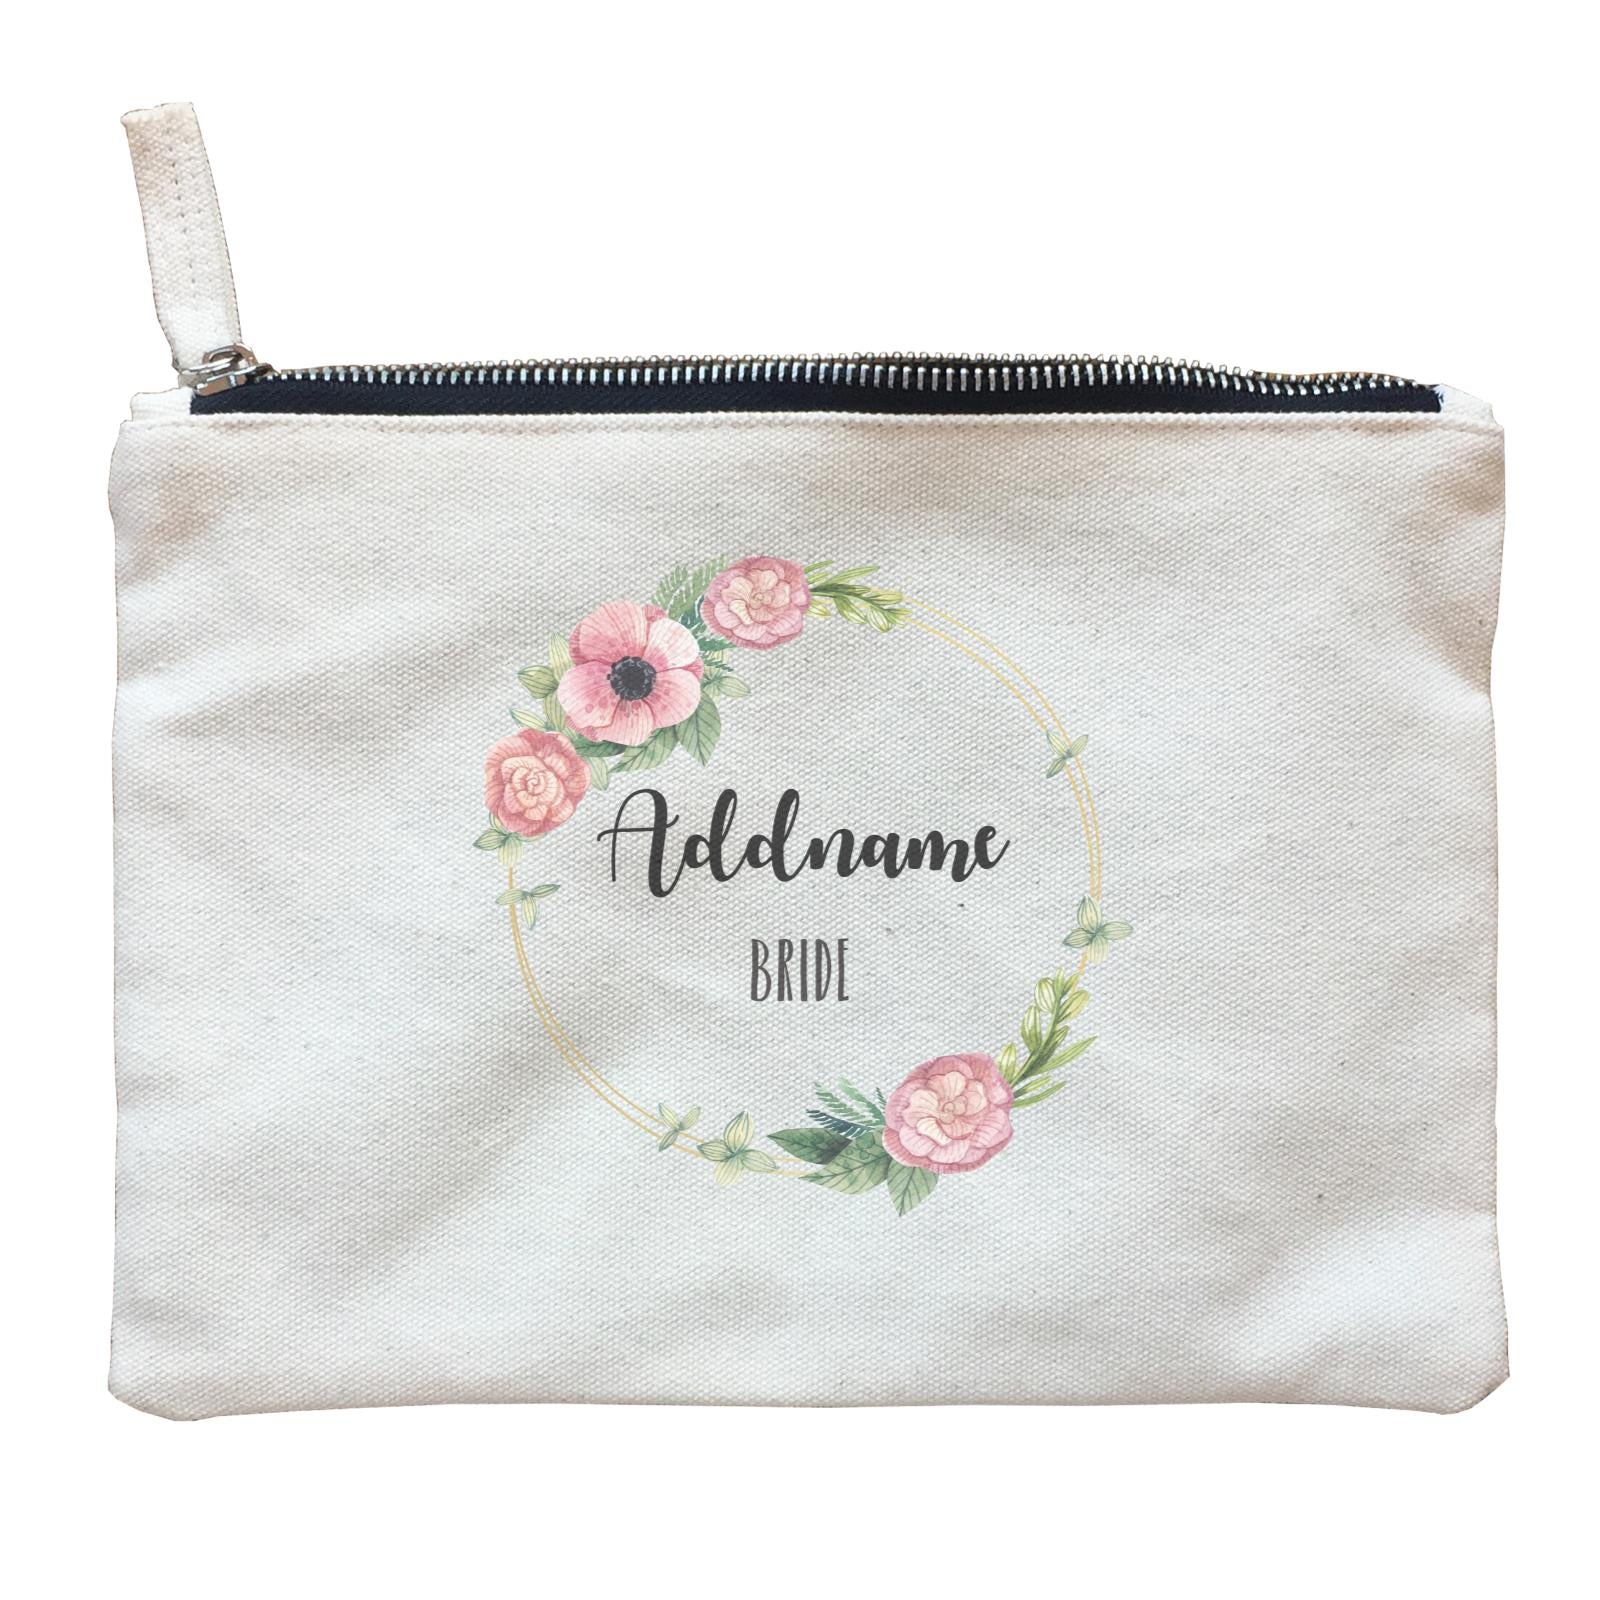 Bridesmaid Floral Sweet Pink Flower Wreath With Circle Bride Addname Zipper Pouch